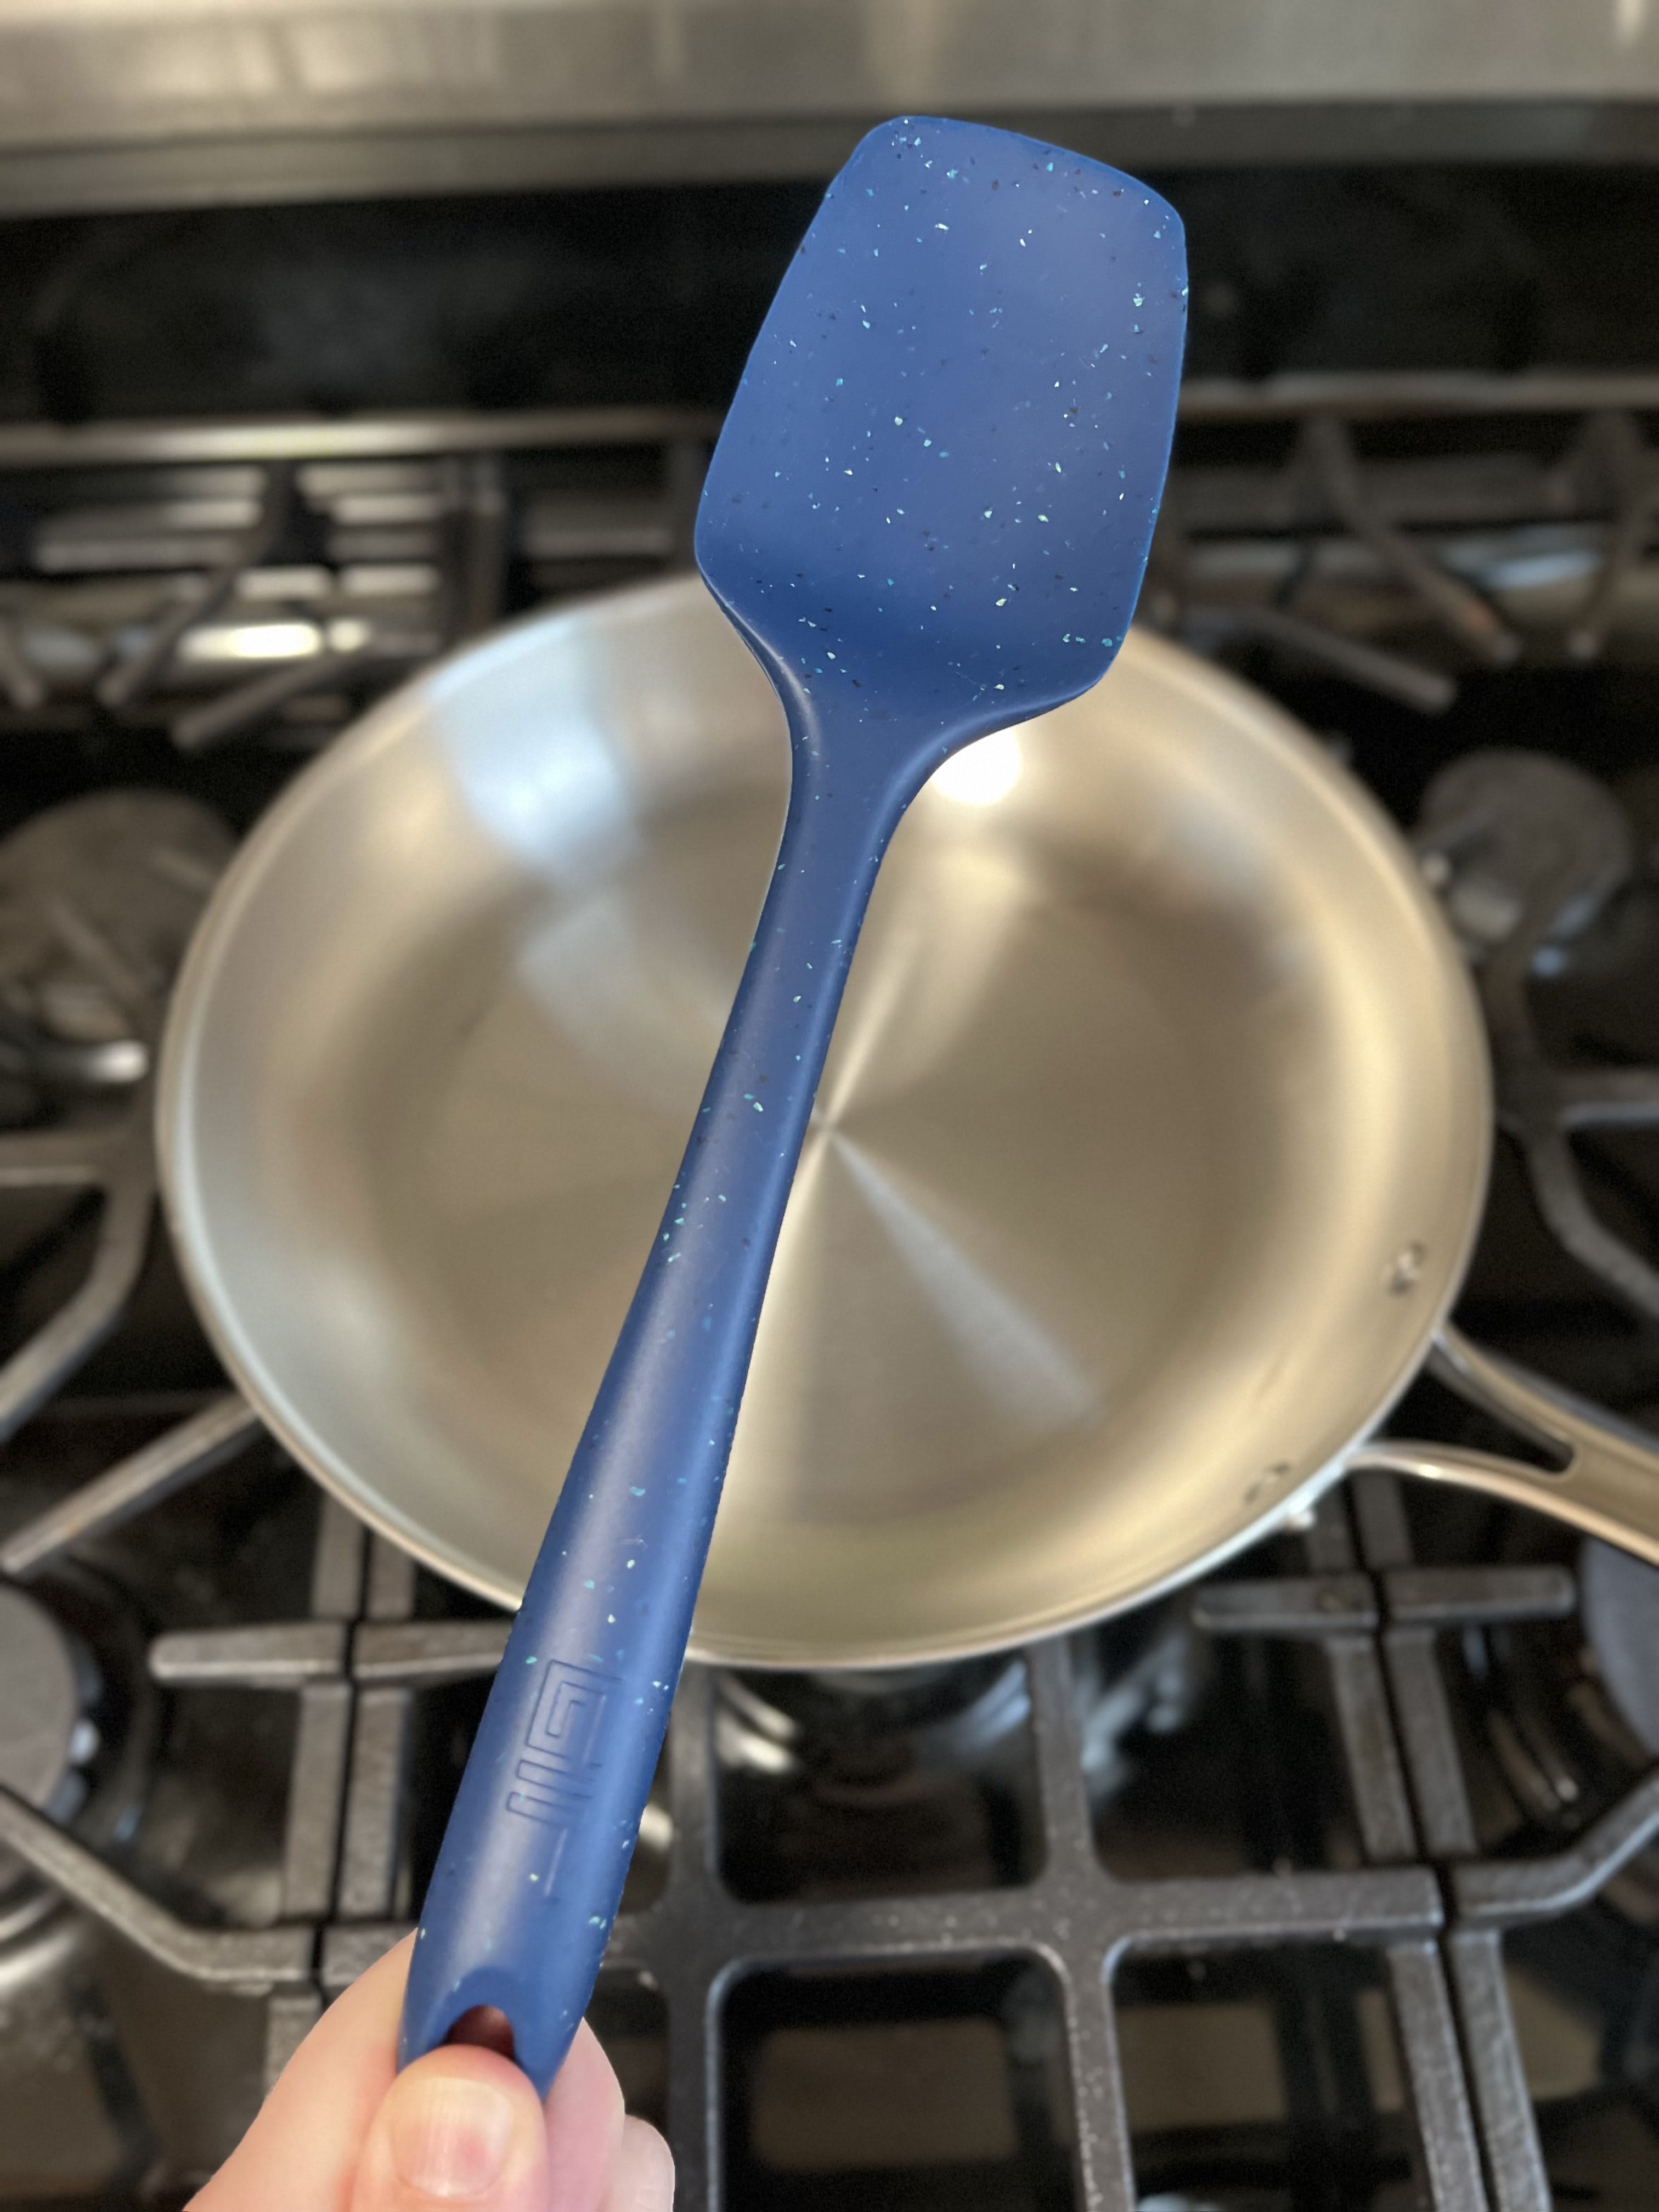 GIR Spoonula Is Amazing All-in-One Kitchen Utensil: Review